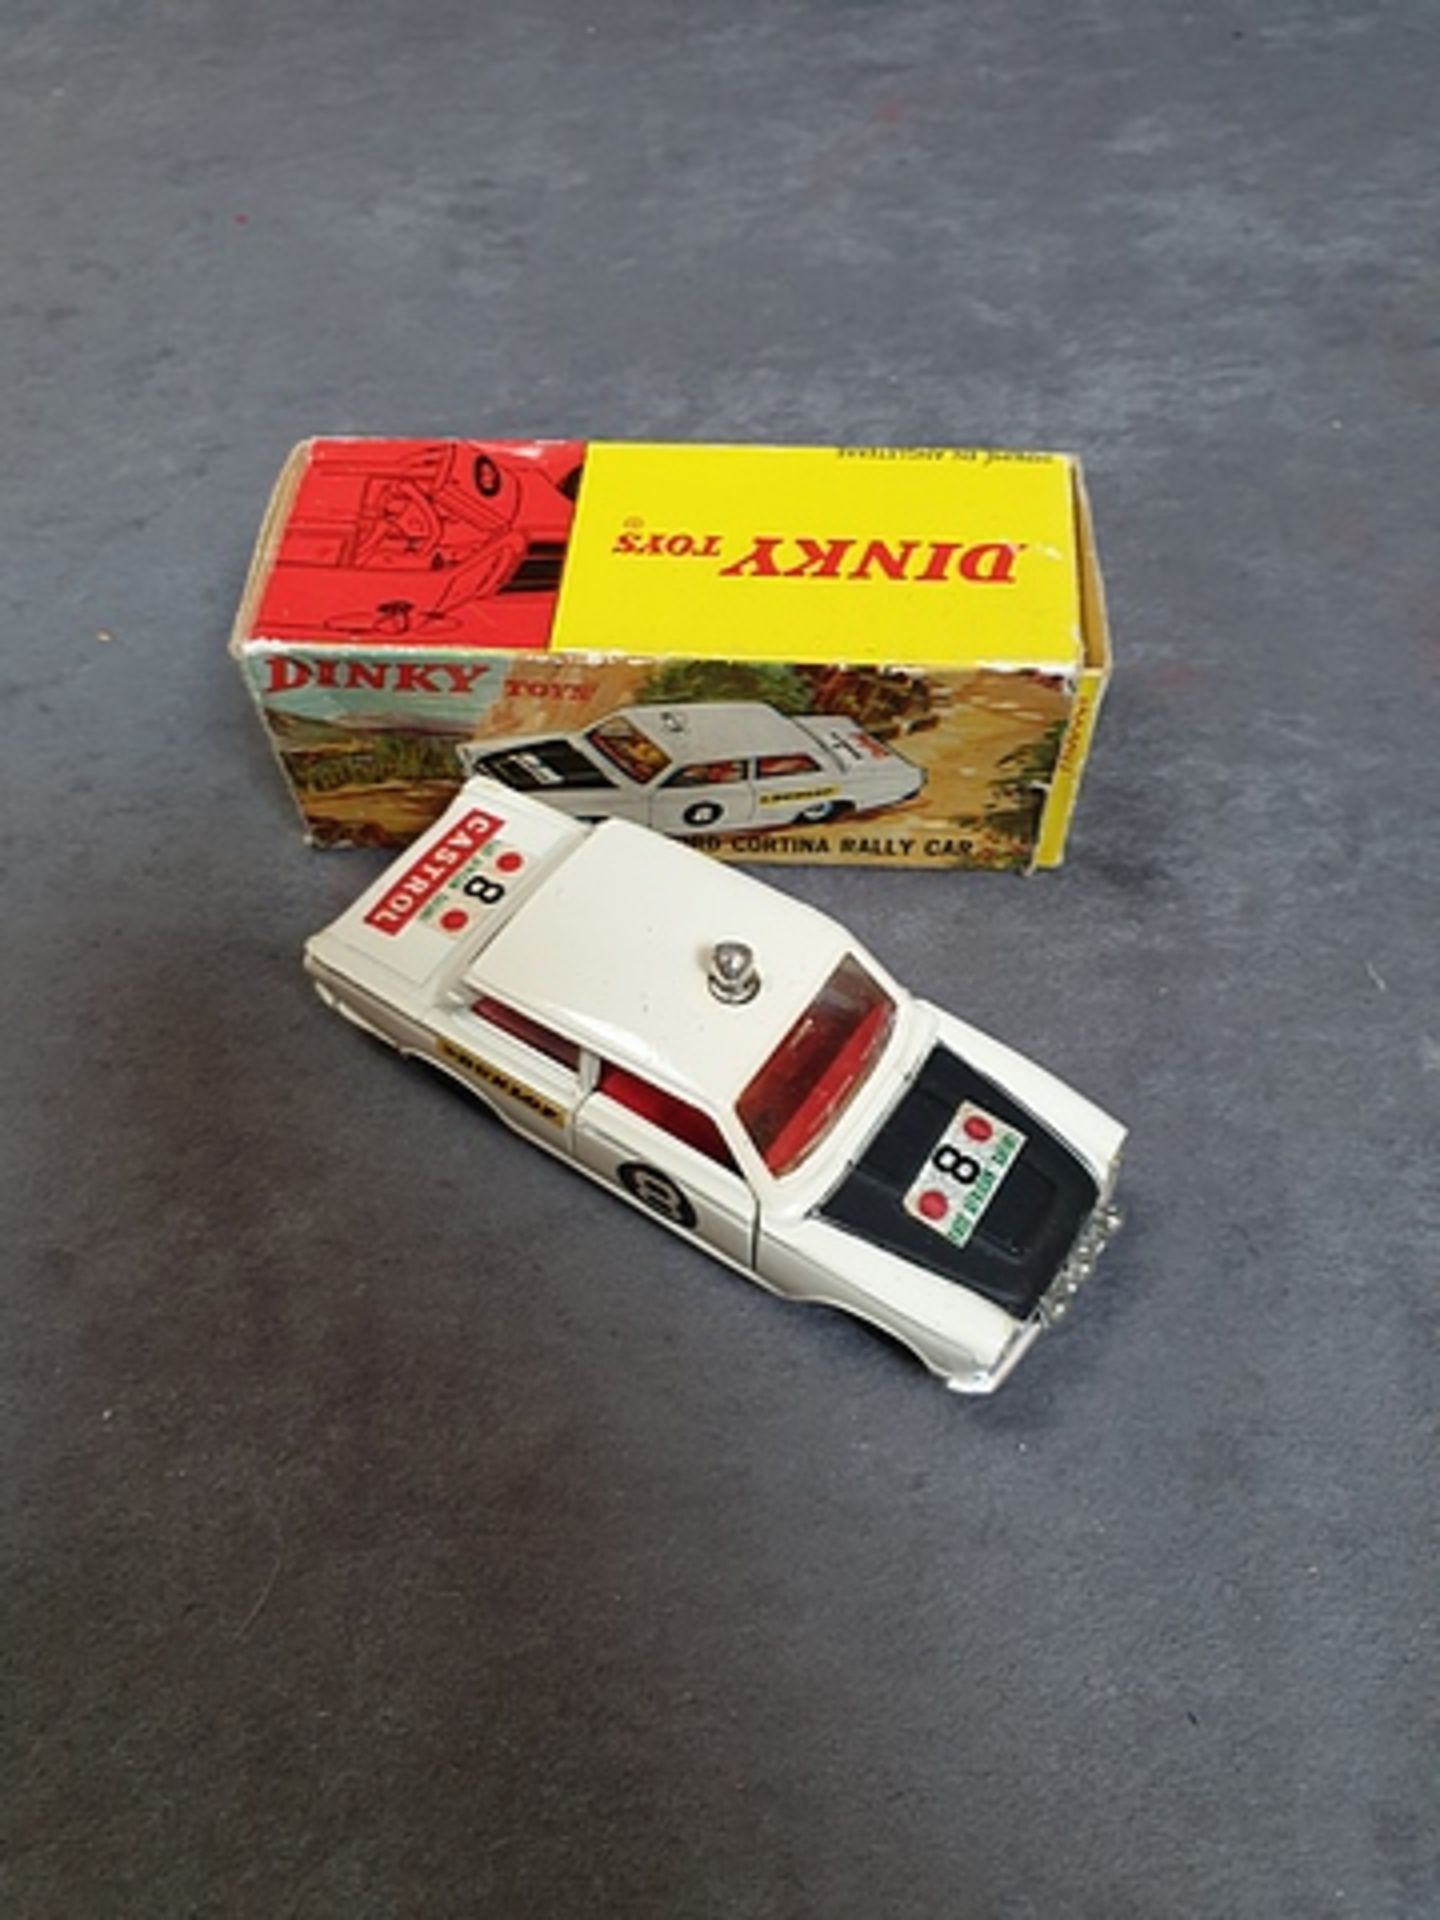 Dinky Diecast Toys #212 Ford Cortina Rally Car Complete In Original Box - Image 3 of 3